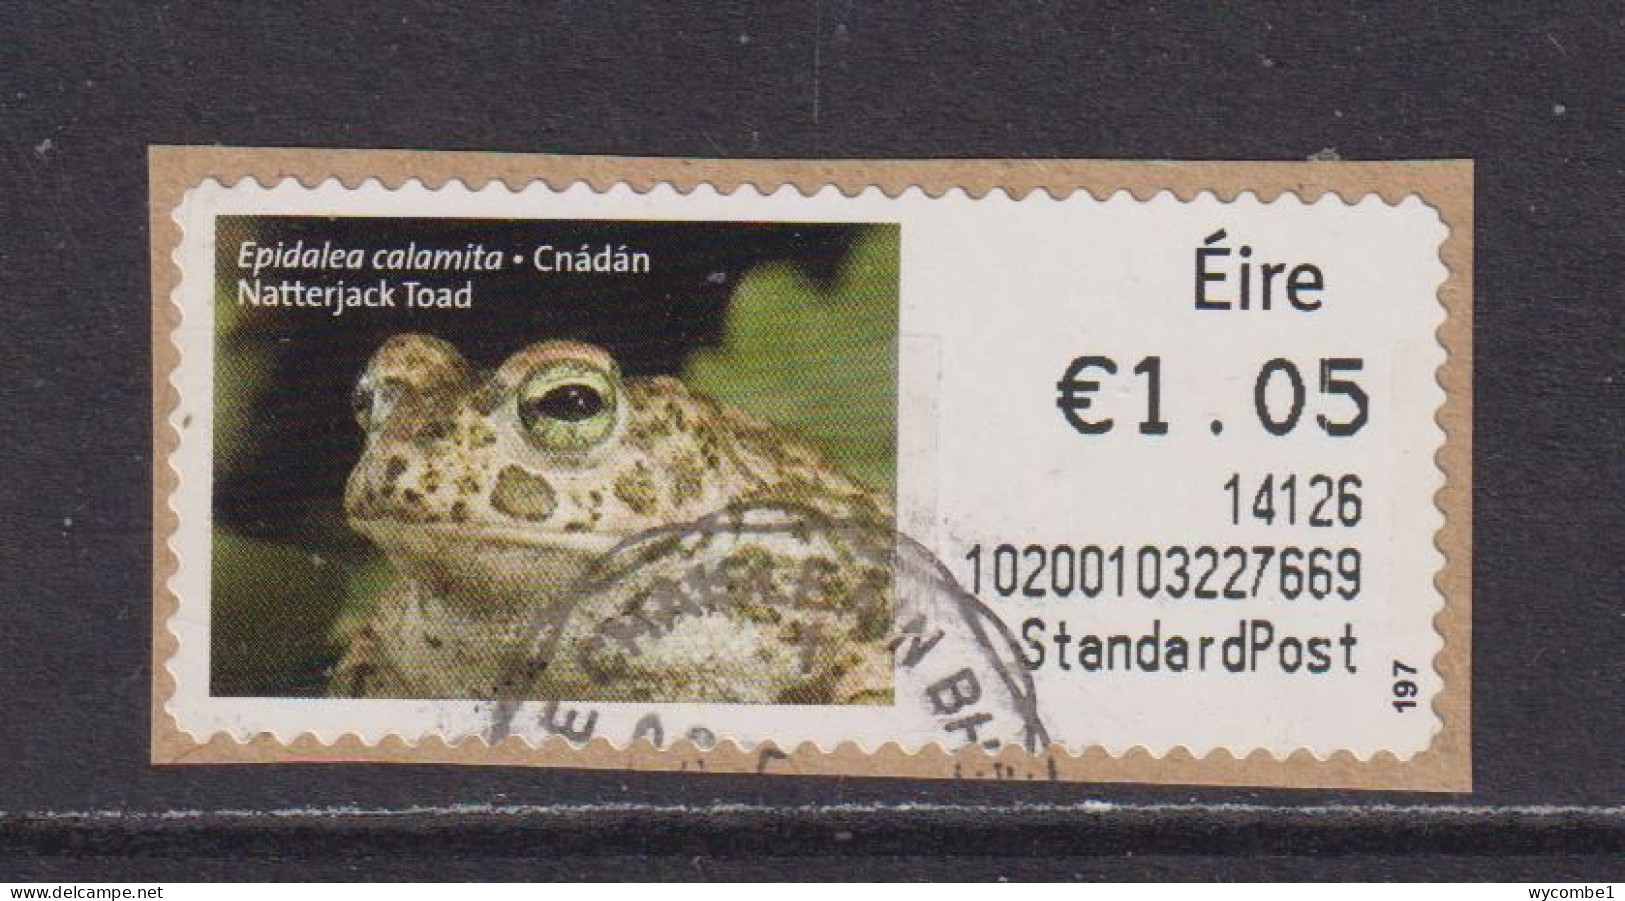 IRELAND  -  2013 Natterjack Toad SOAR (Stamp On A Roll)  CDS  Used On Piece As Scan - Used Stamps